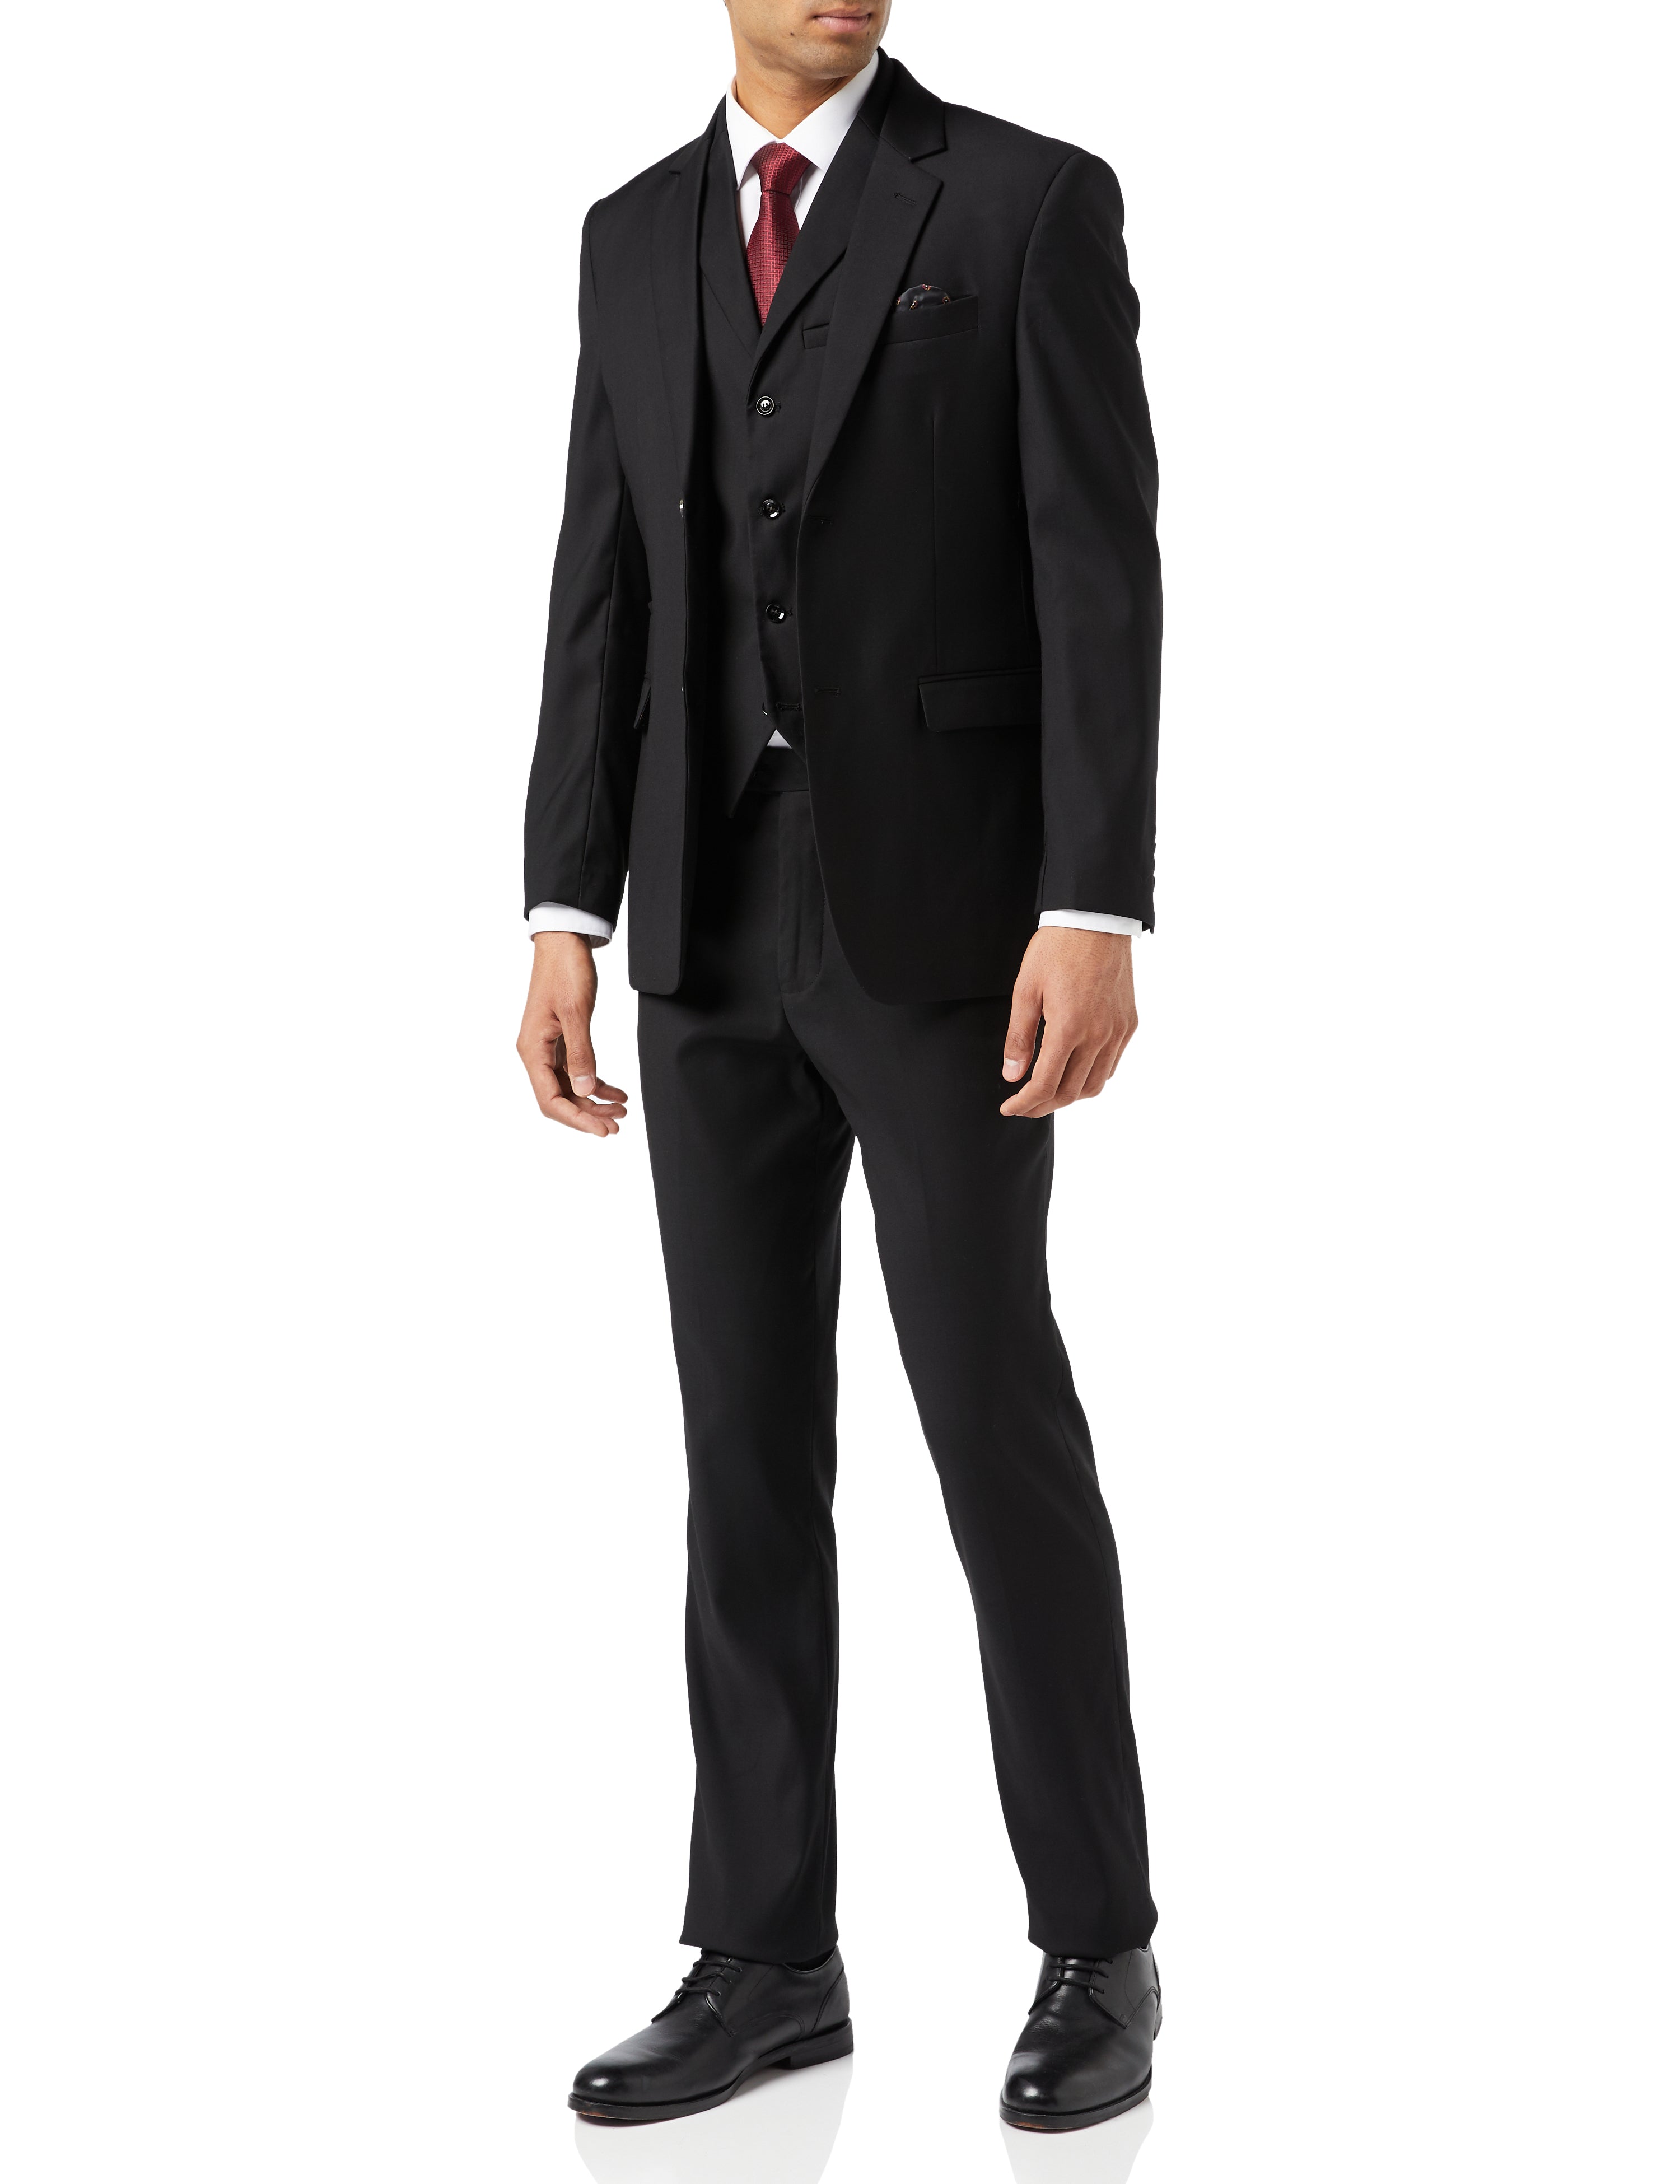 GRAHAM - BLACK SINGLE BREASTED BUSINESS SUIT